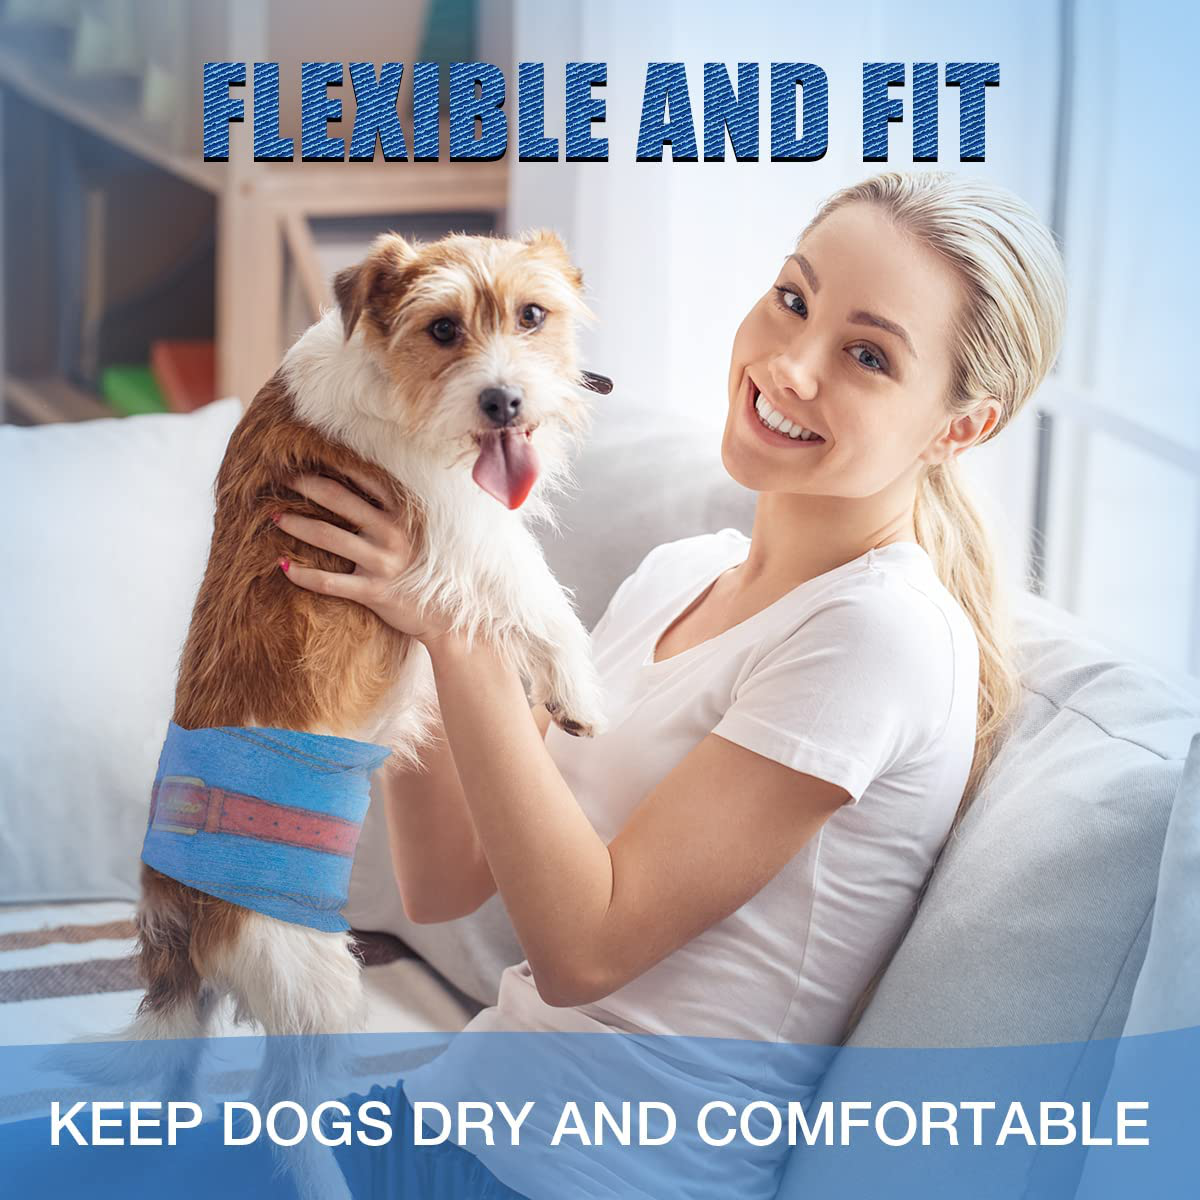 Dono Disposable Dog Diapers Male-Dogs Jeans Super Absorbent Soft Pet Diapers Doggie Wraps for Male Puppy Dogs 18Pcs,Leak Protection Excitable Urination or Incontinence Animals & Pet Supplies > Pet Supplies > Dog Supplies > Dog Diaper Pads & Liners Dono   